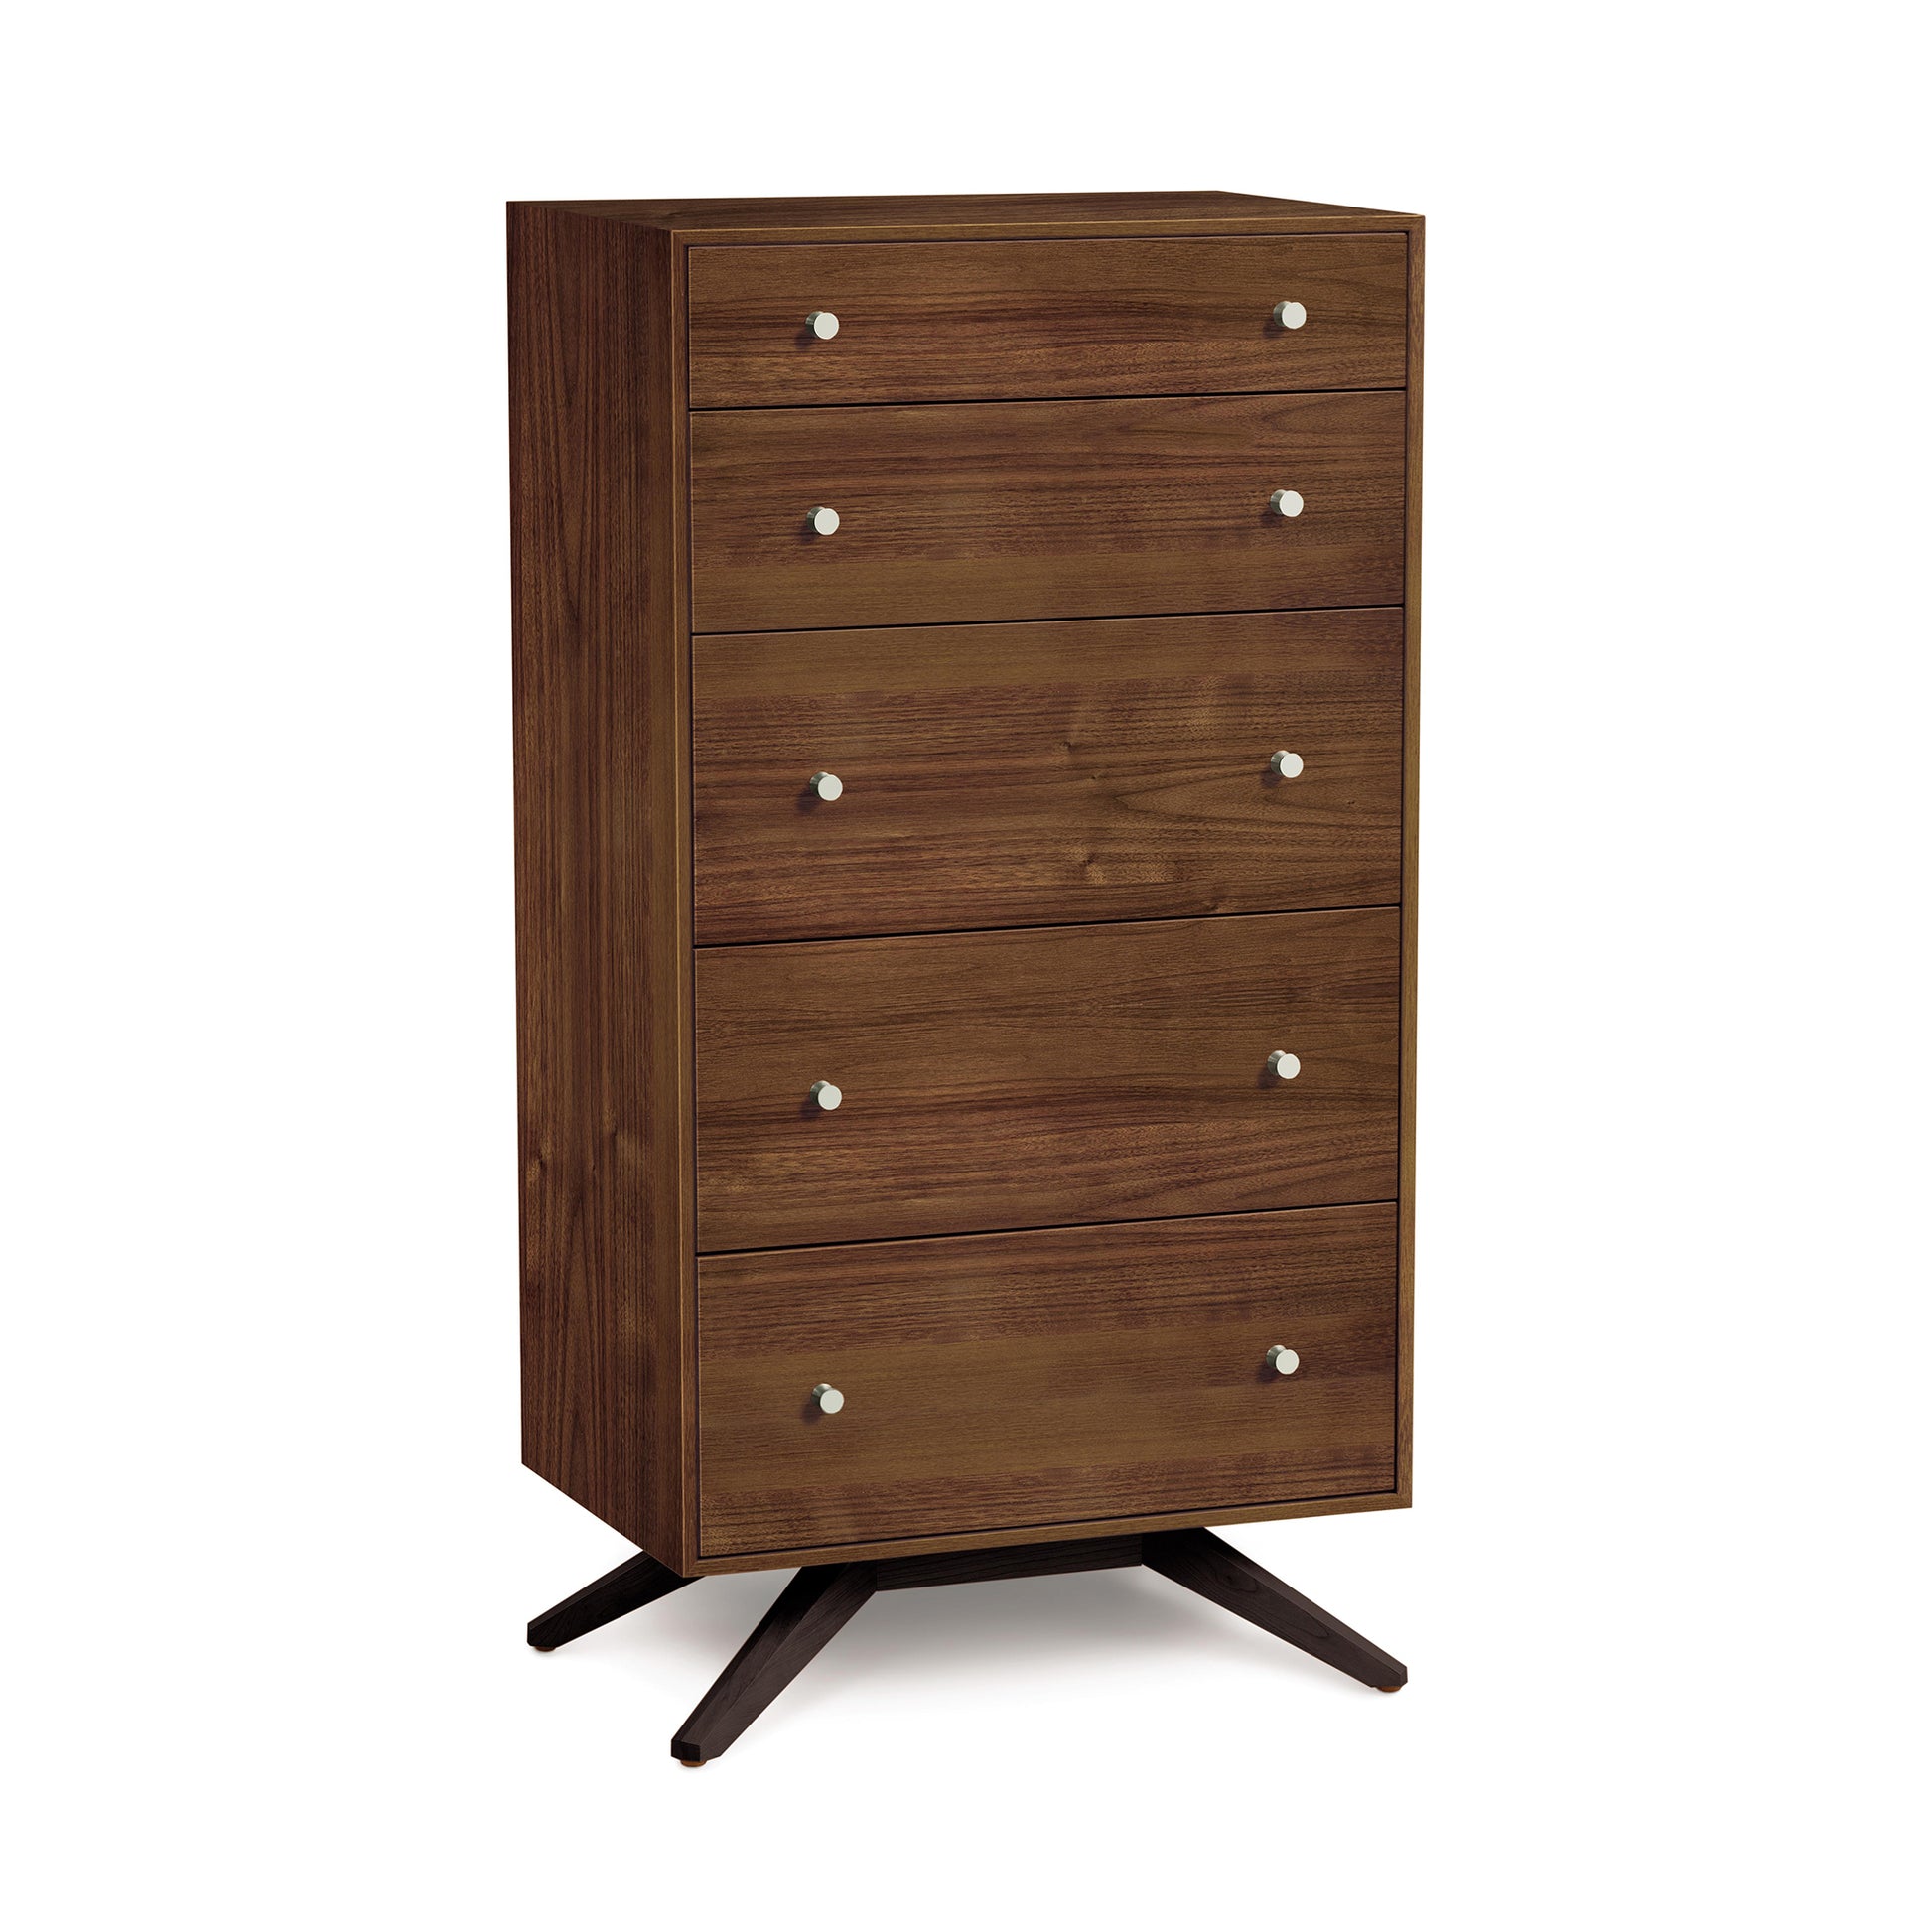 A solid cherry hardwood Copeland Furniture Astrid Cherry 5 Drawer Chest with five pulls against a white background.